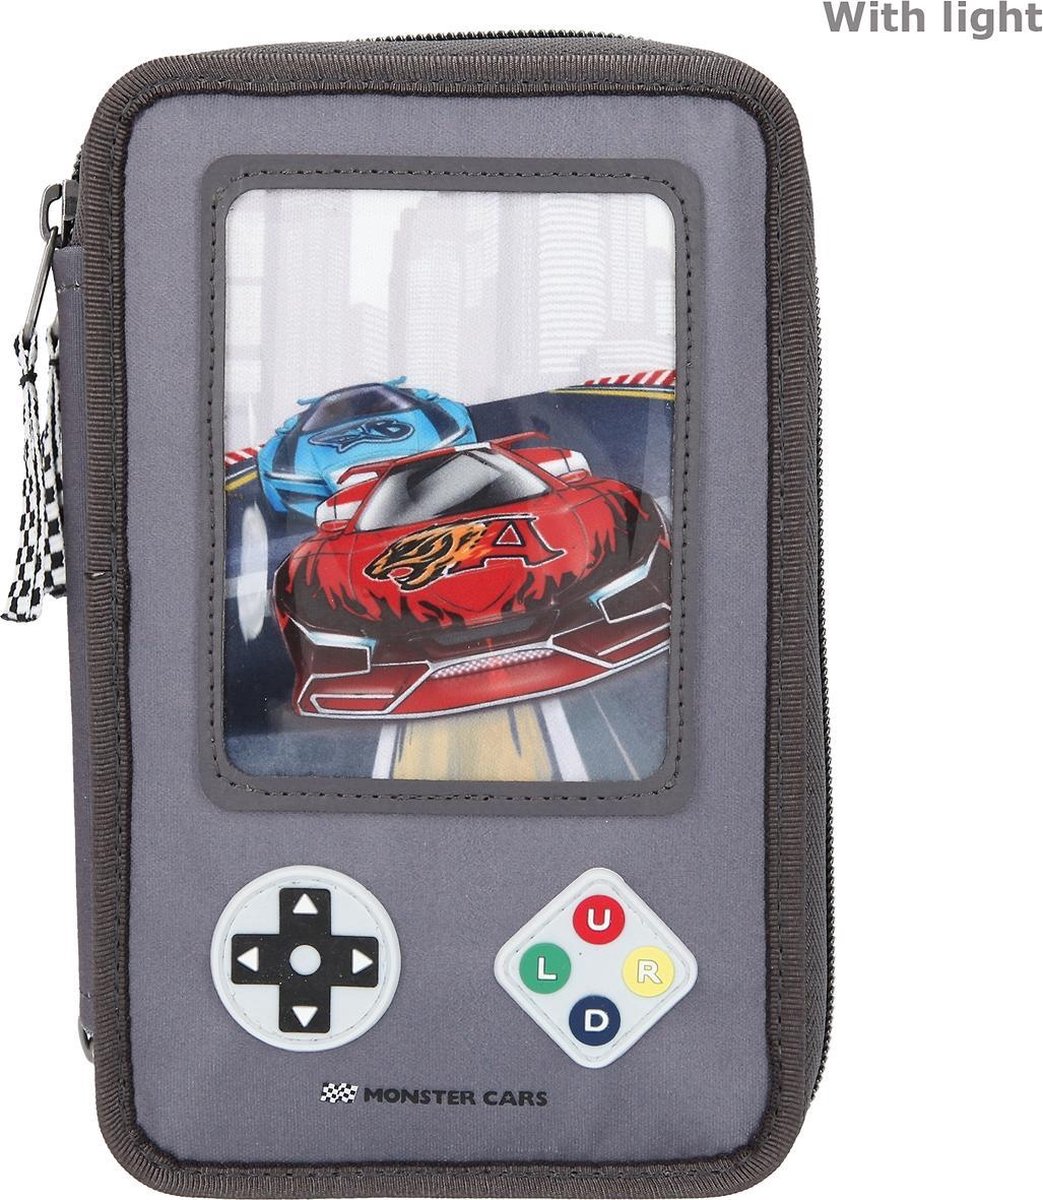 Monster Cars - Trippel Pencil Case w/LED - Gameboy (411075)